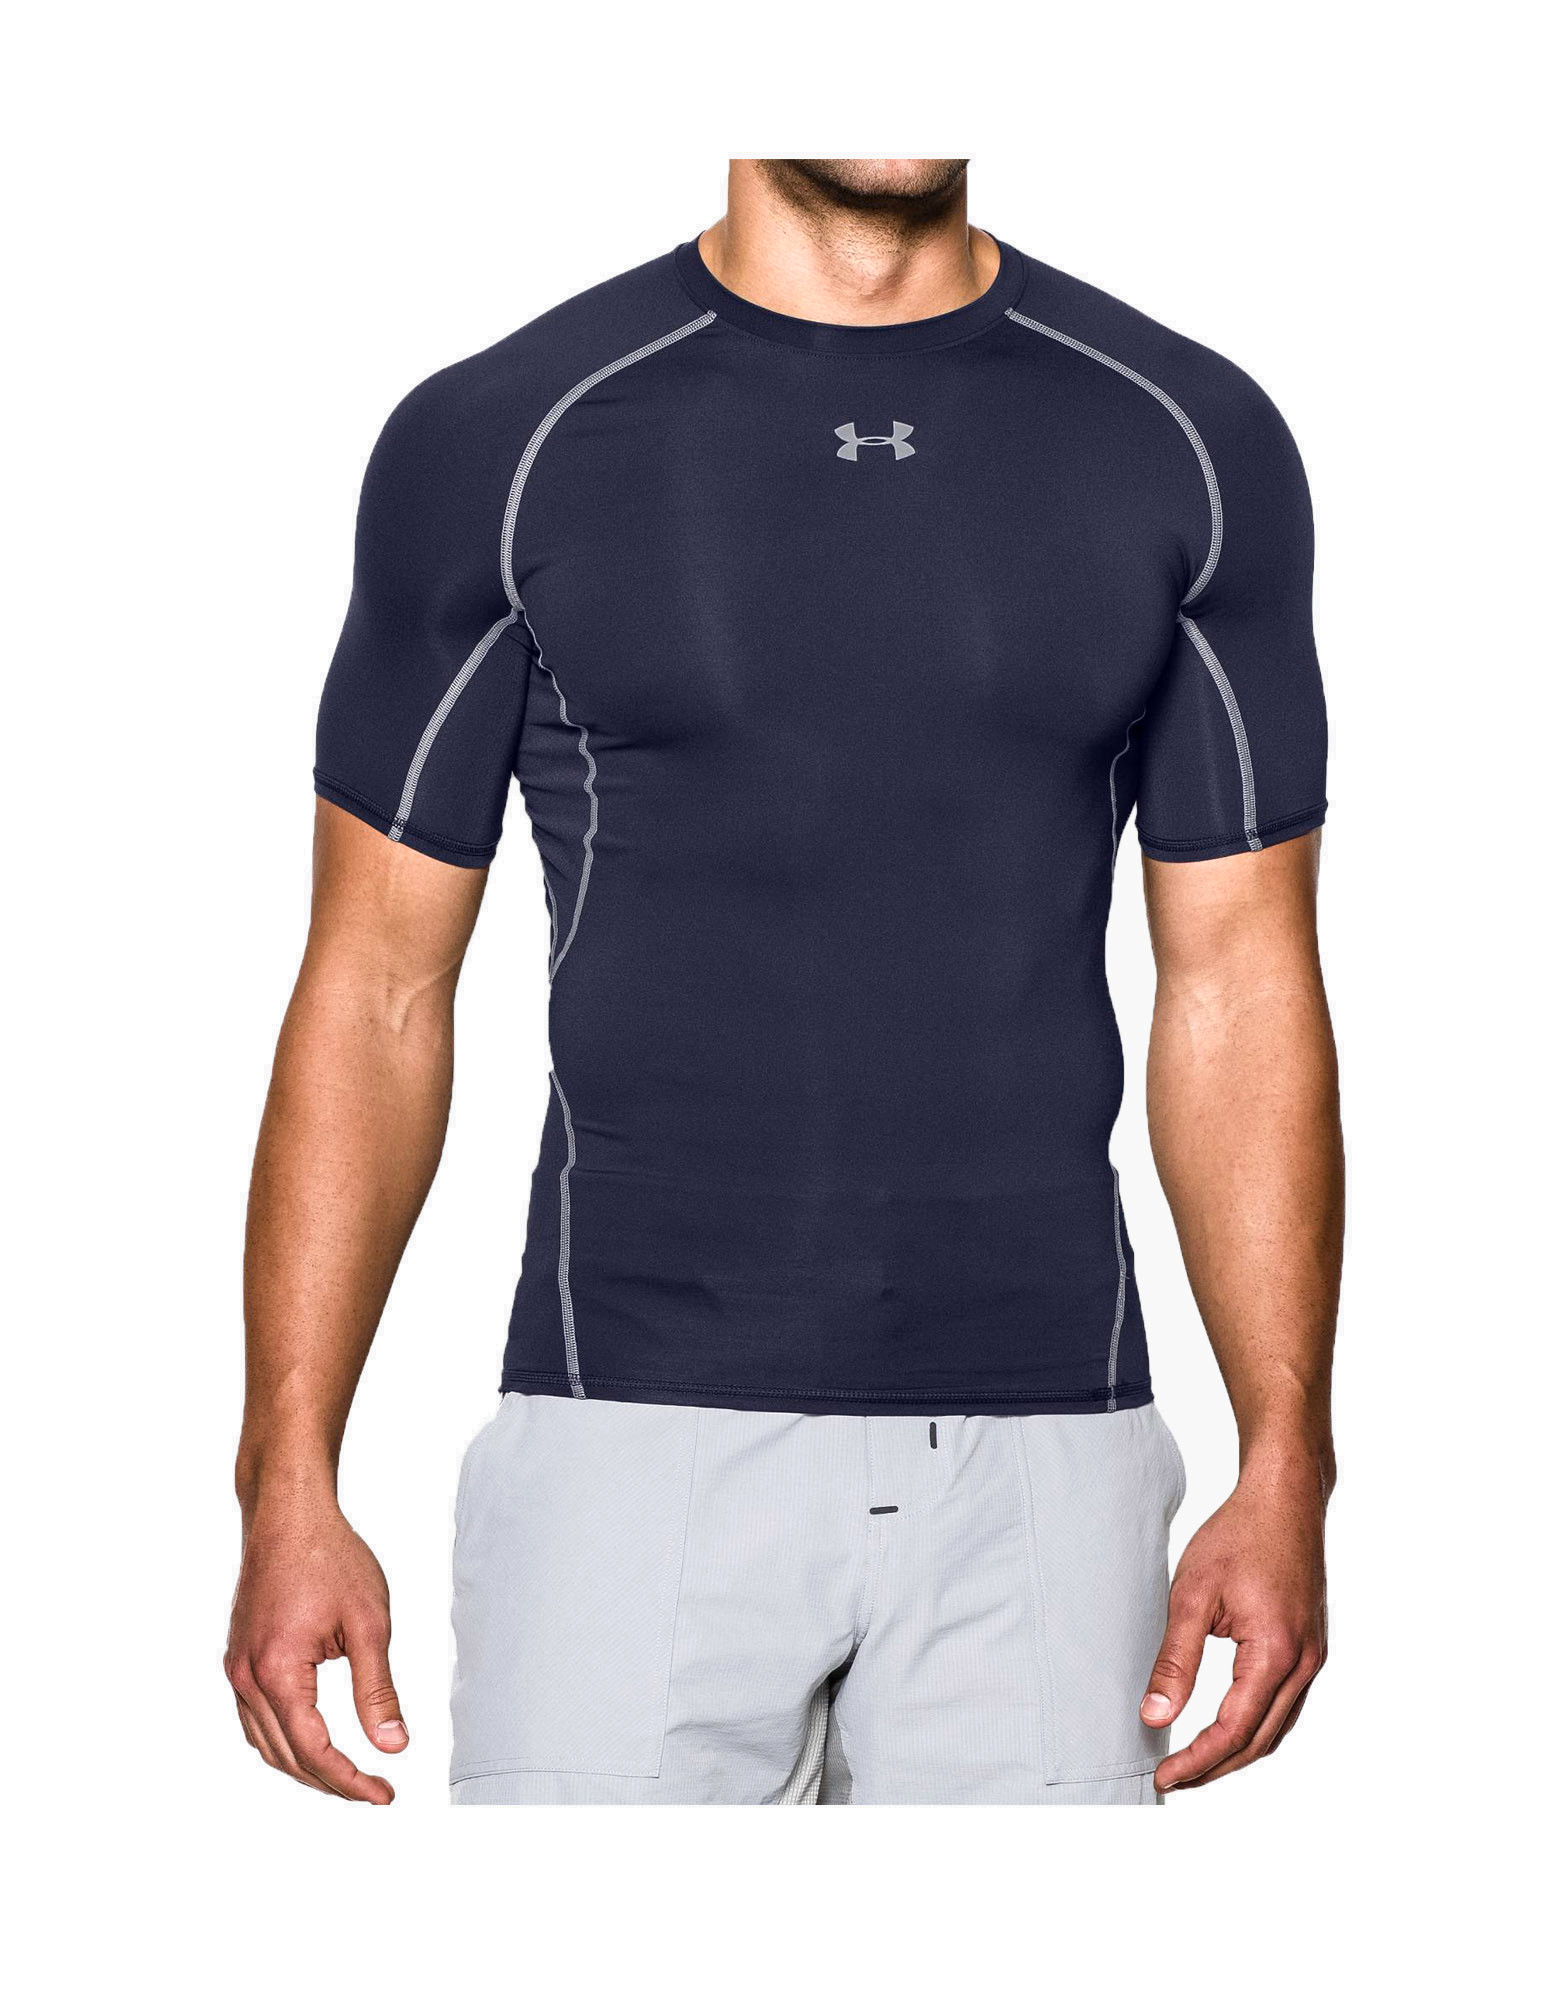 under armour short sleeve compression